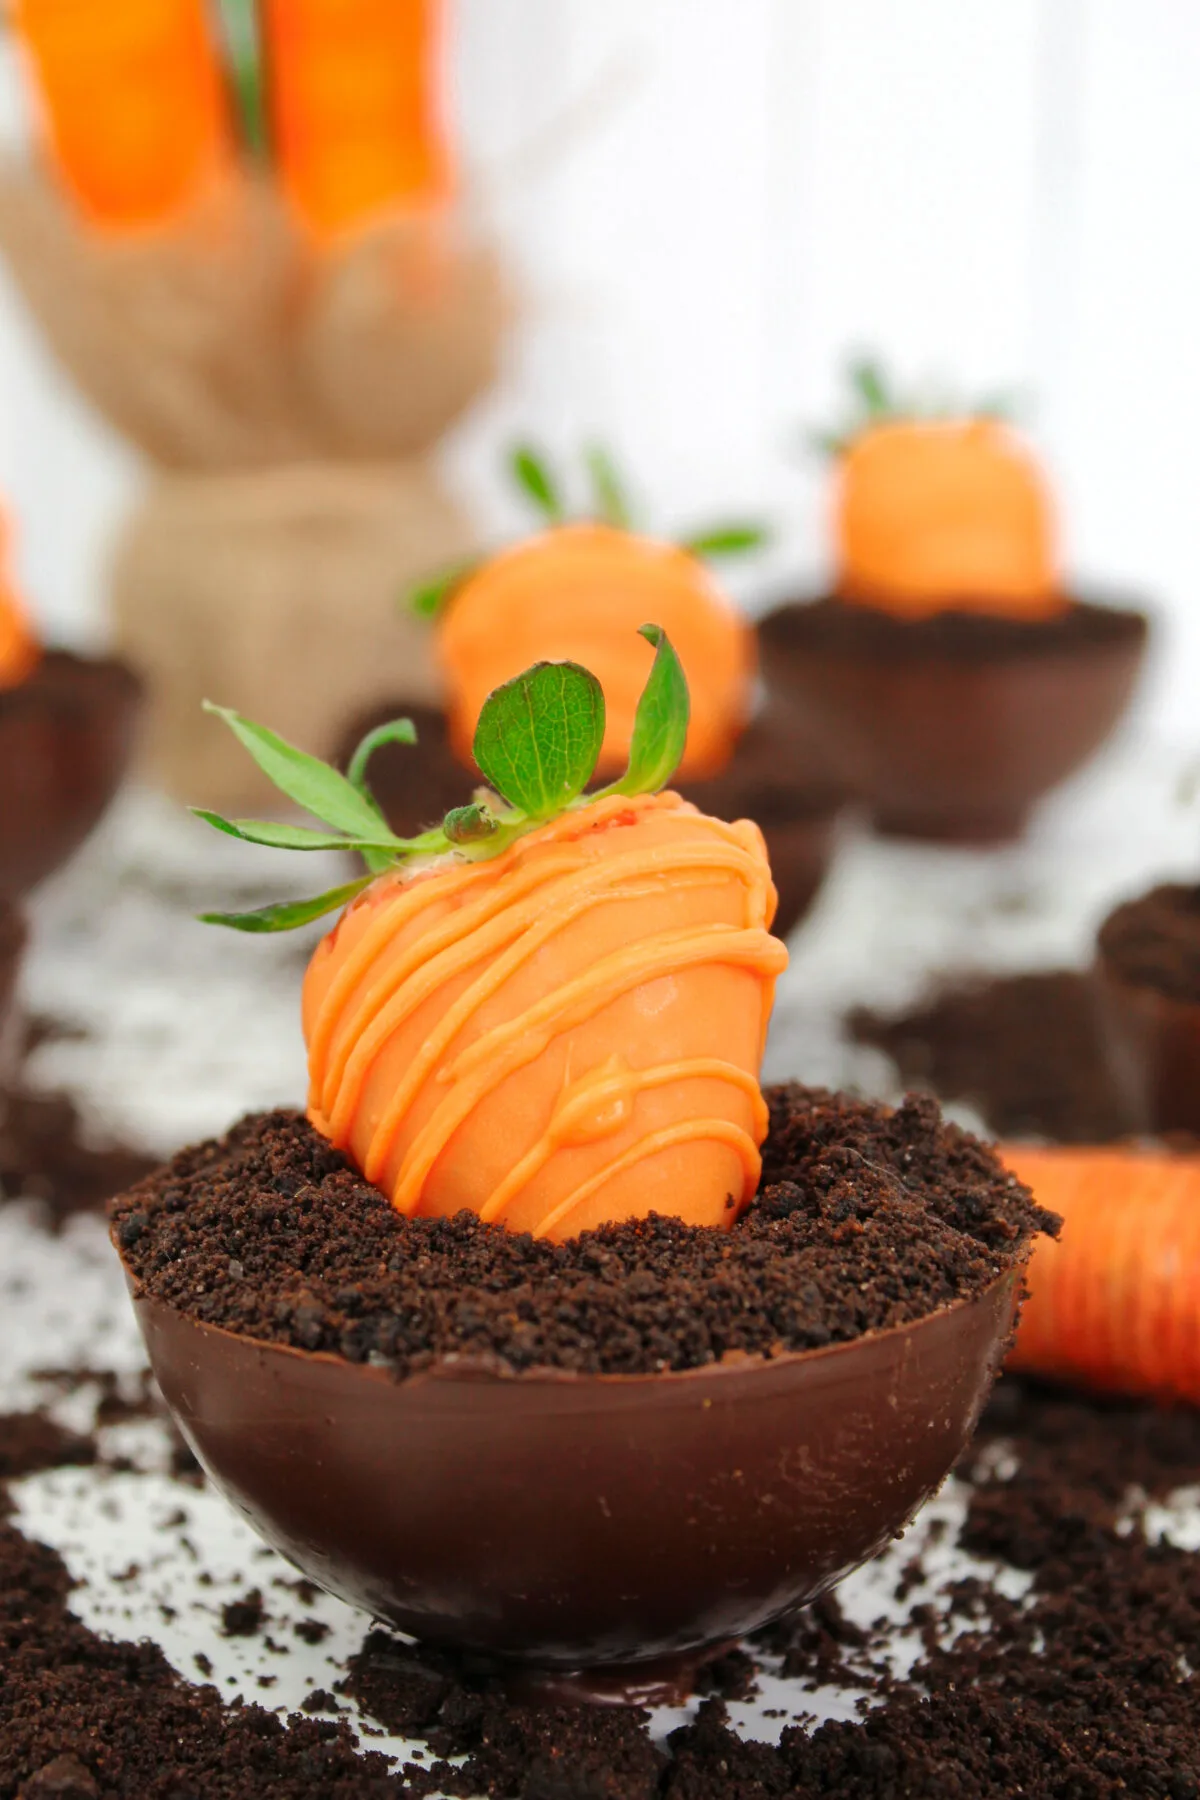 Make Easter extra special with Carrot Patch Chocolate Bowls, made with Brownie pieces, chocolate ganache, and a chocolate dipped strawberry.